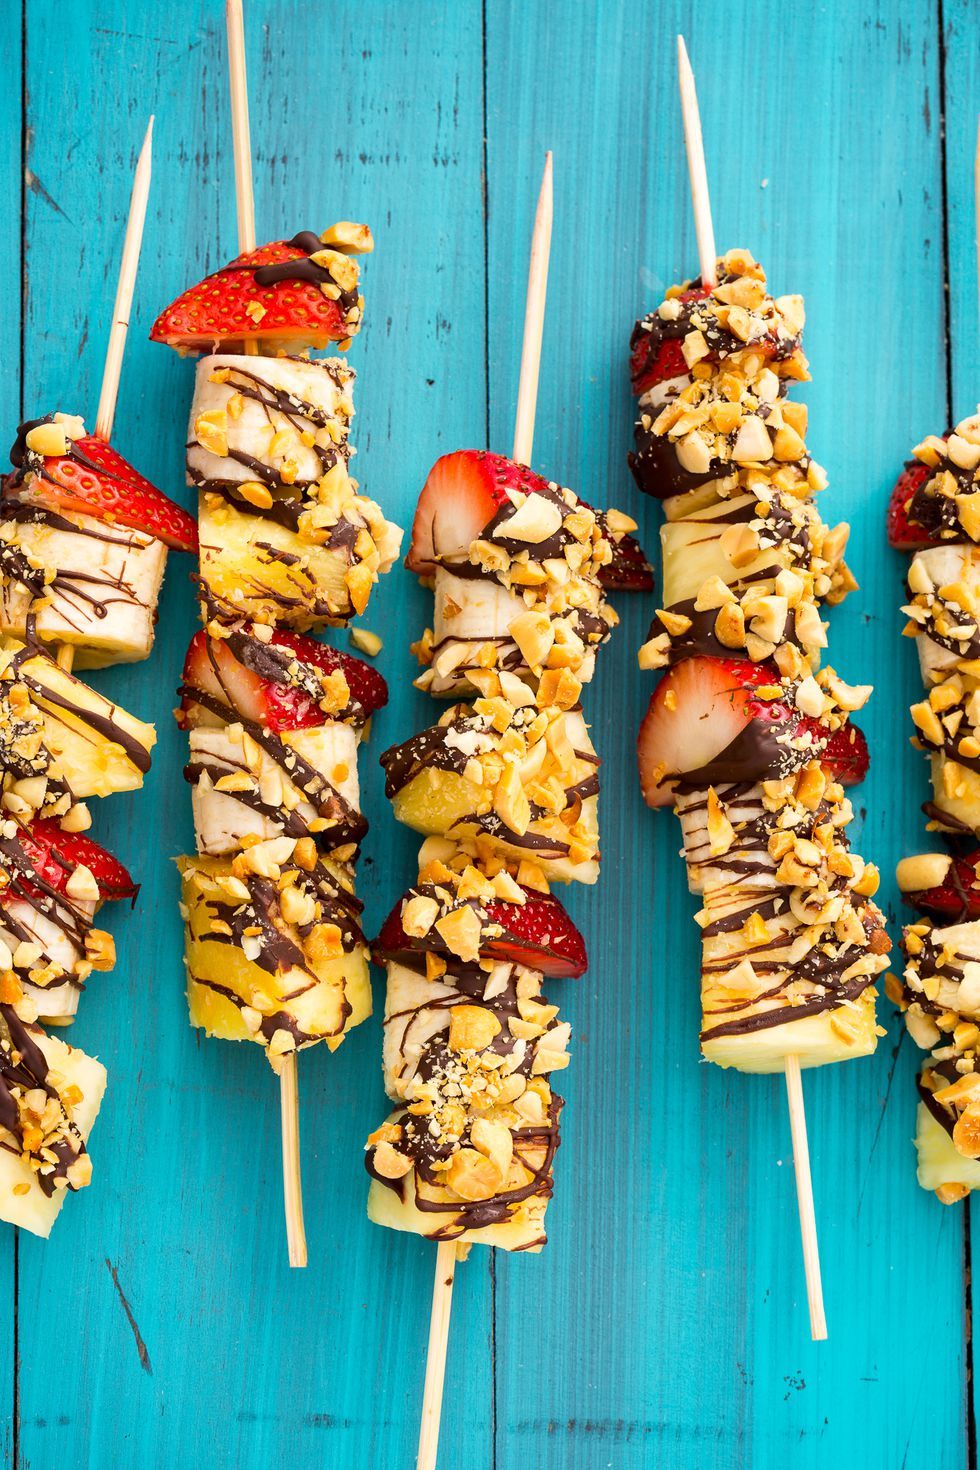 21 dairy-free dessert recipes for summer